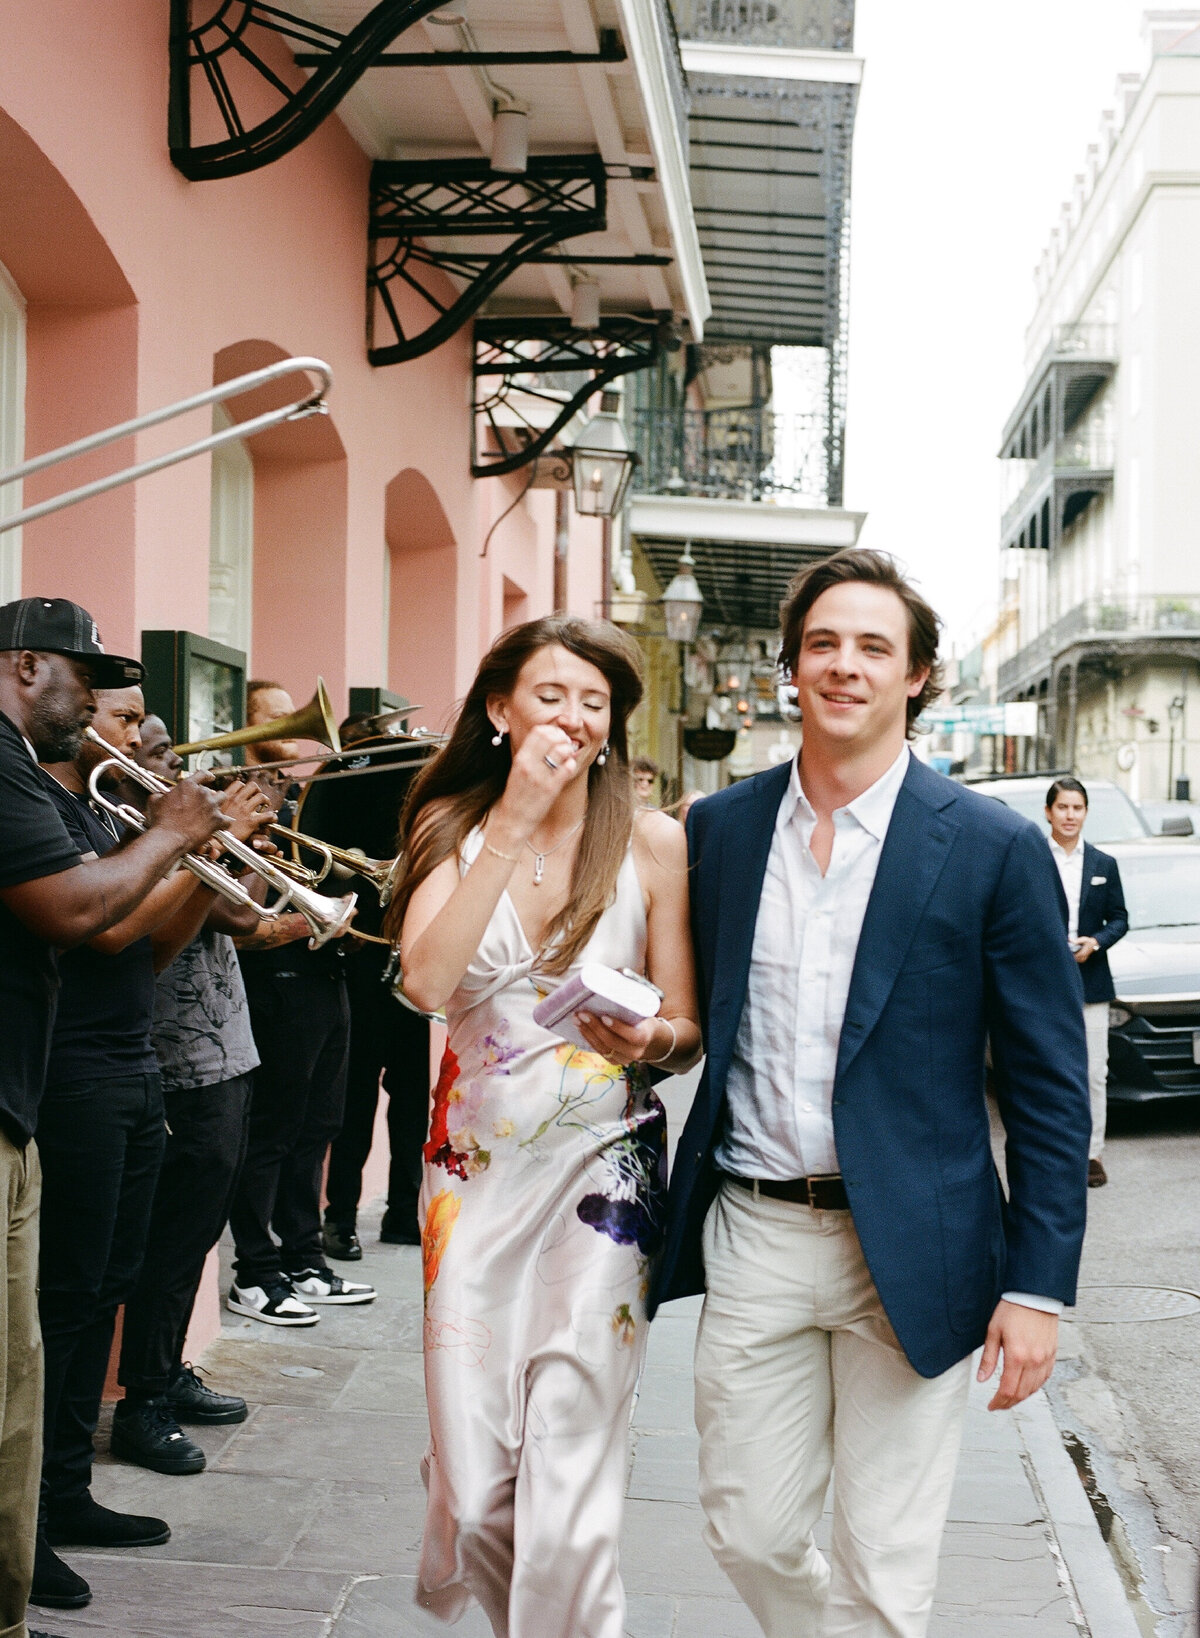 Sarah + George - Rehearsal Dinner Welcome Party at Brennen's New Orleans - Luxury Event Planner - Michelle Norwood Events13